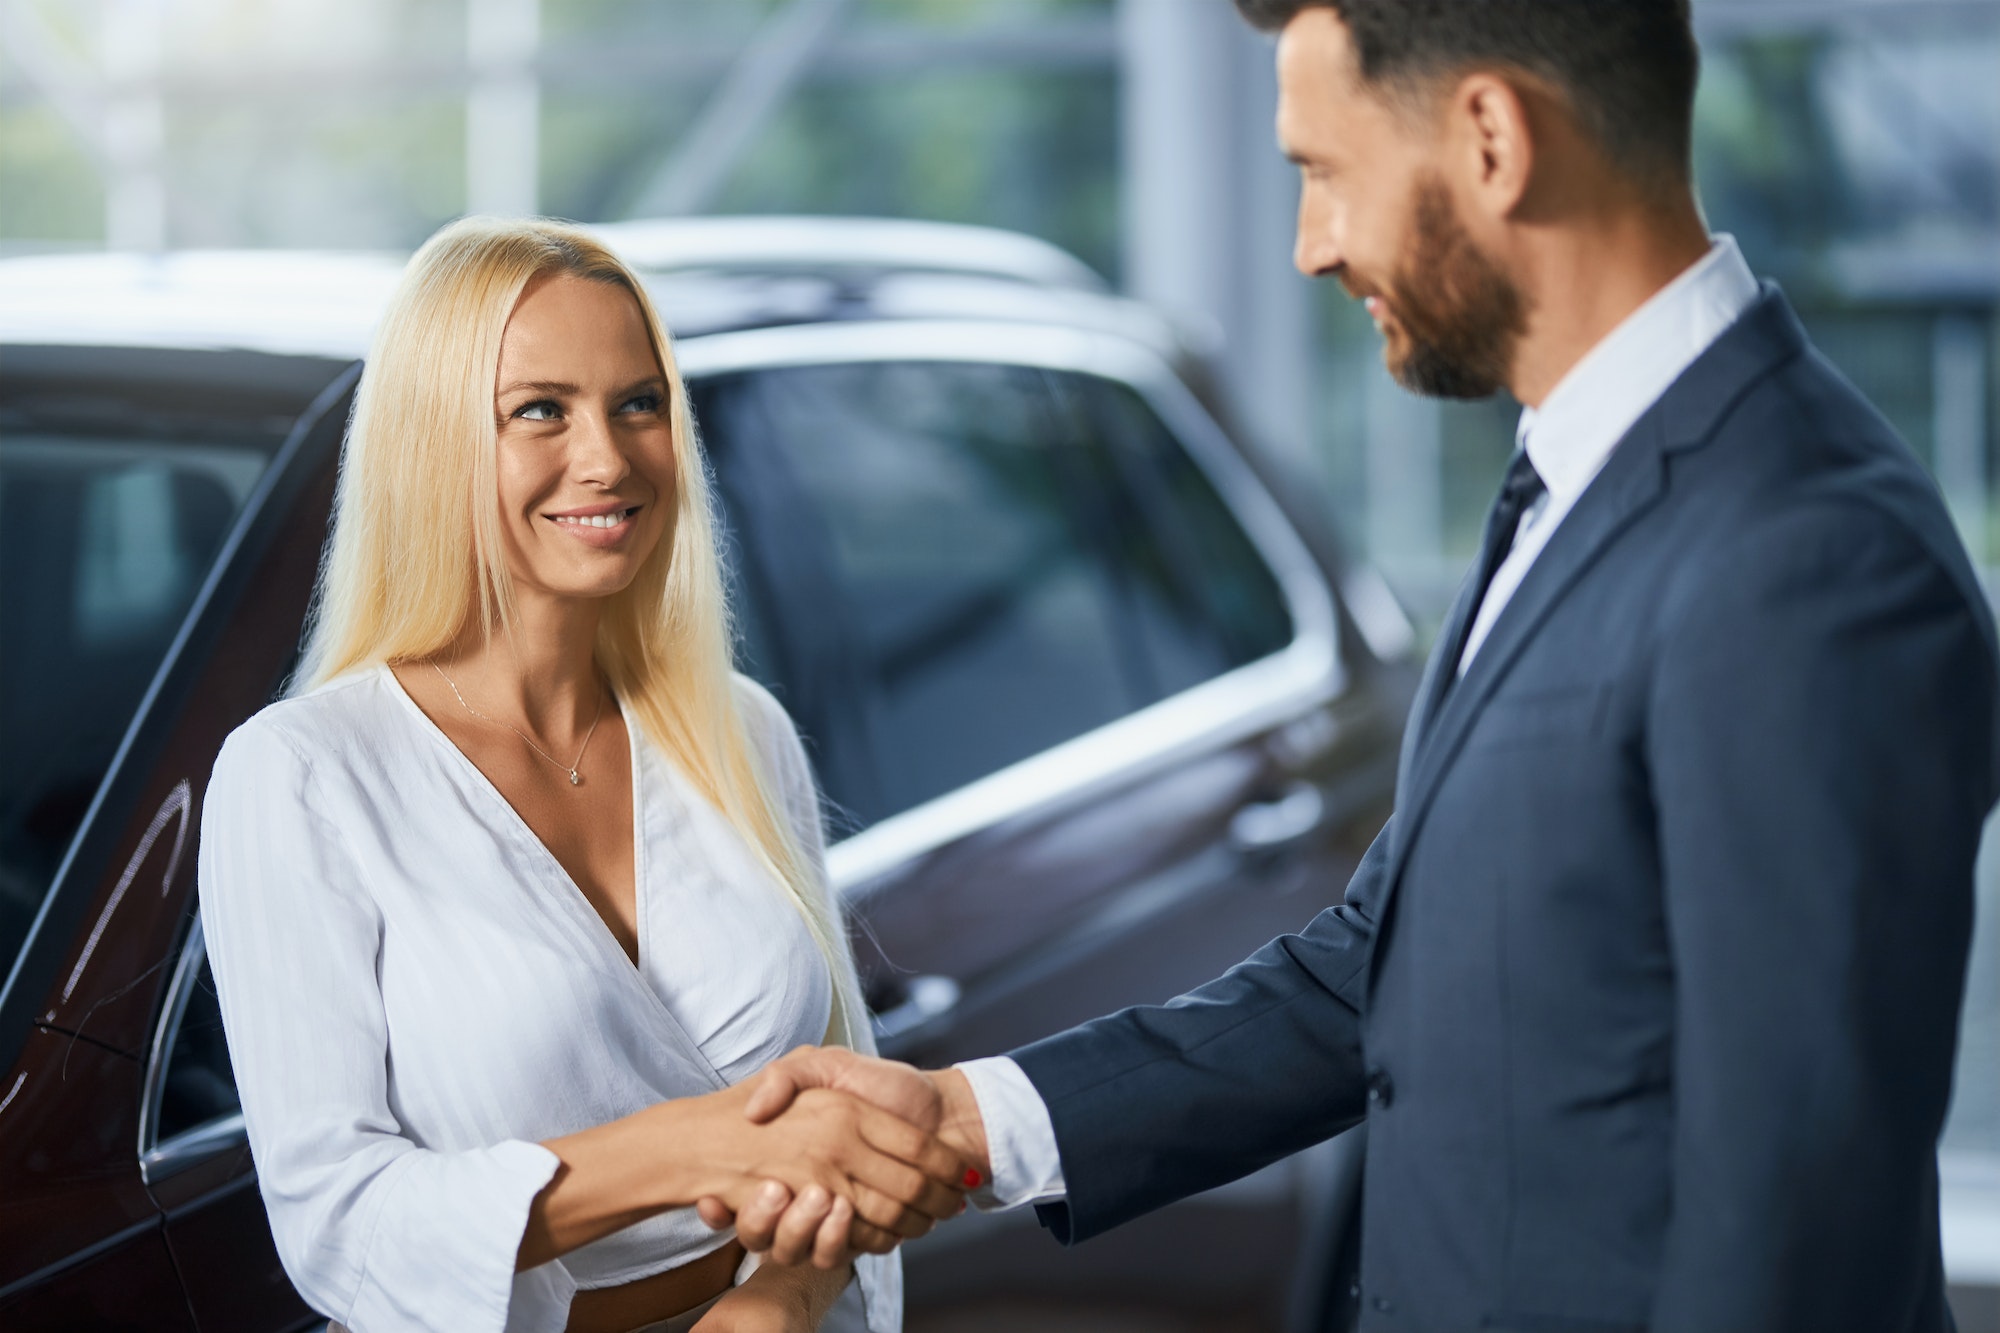 Car dealer shaking hands woman after car purchase